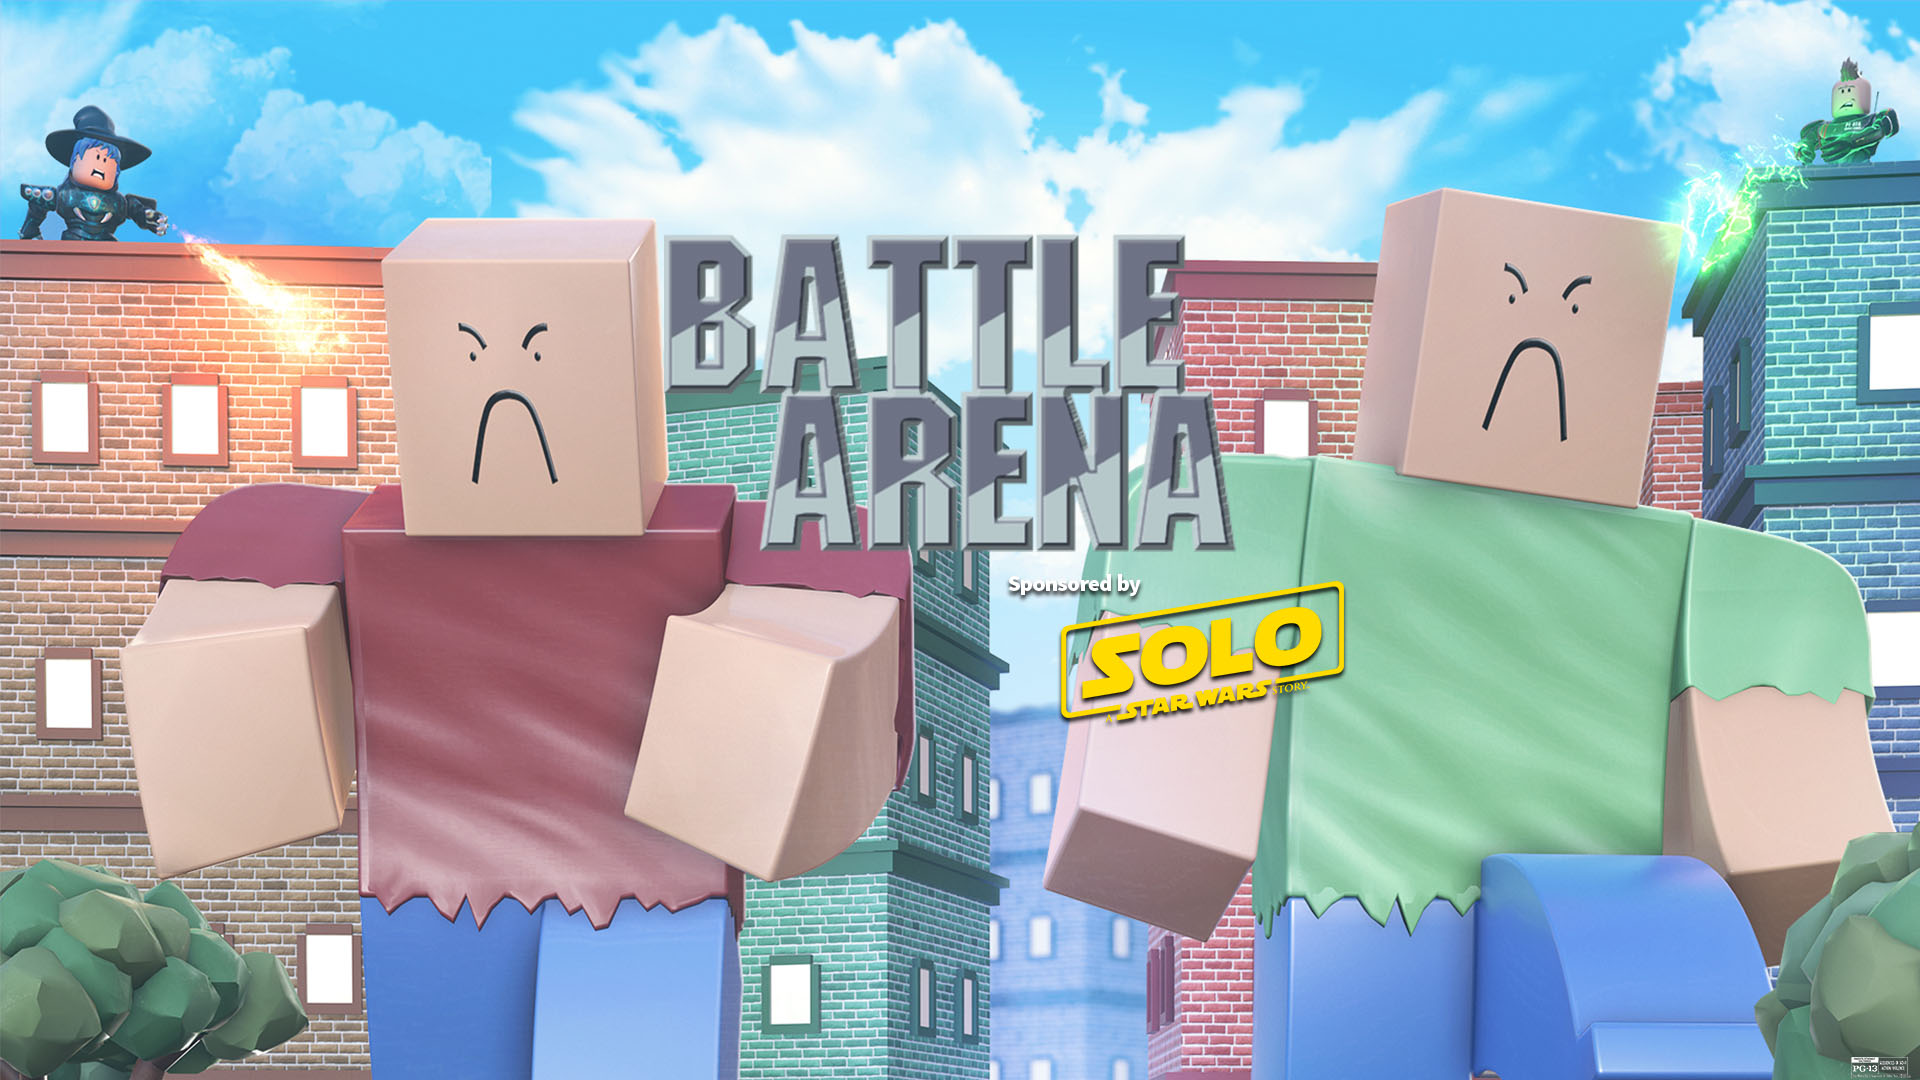 Battle For Glory In The Battle Arena Event Roblox Blog